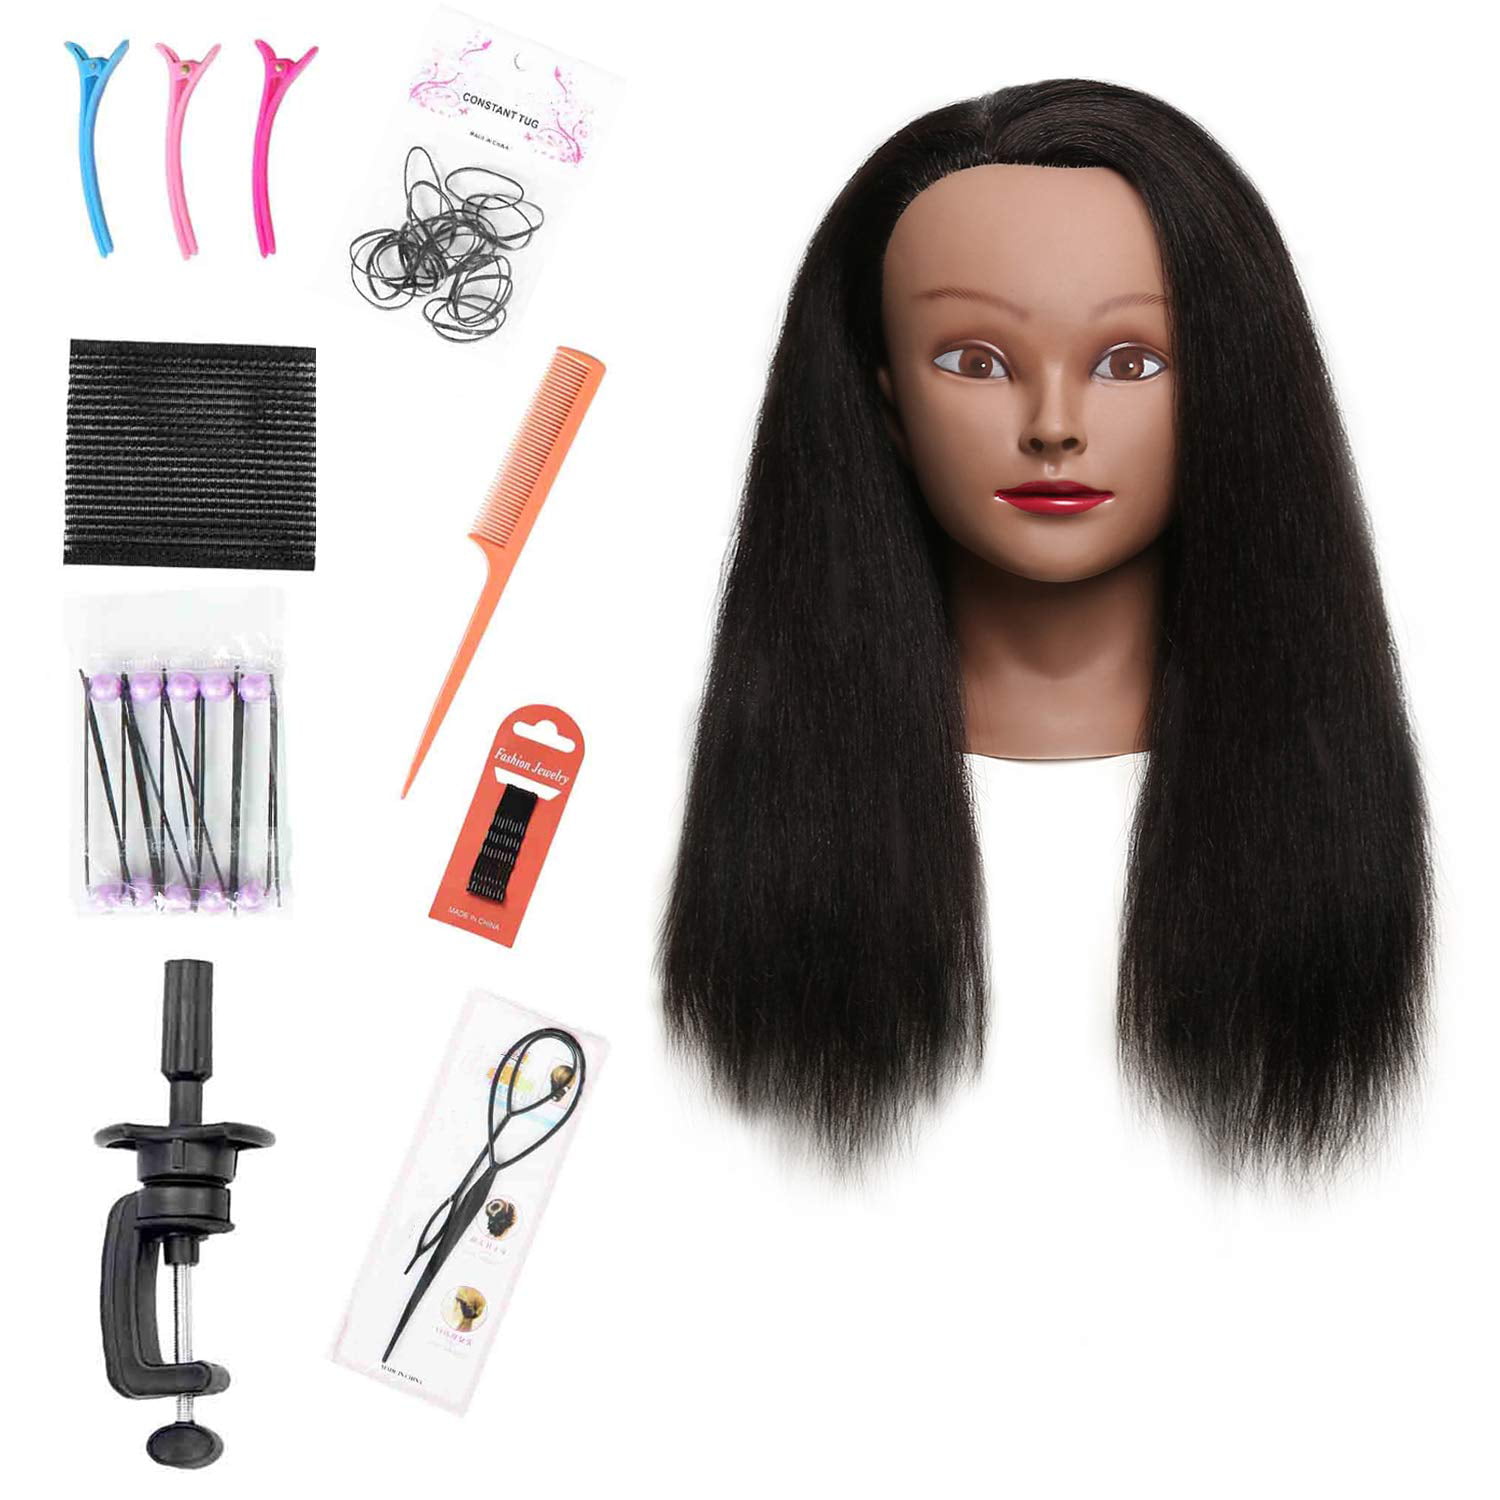 JMHAIR Mannequins Head 16 100% Real Hair For Manual Braiding Styling  Practice Hairdresser School Manikin Head Curling Dyeing Hairdresser  Cosmetology